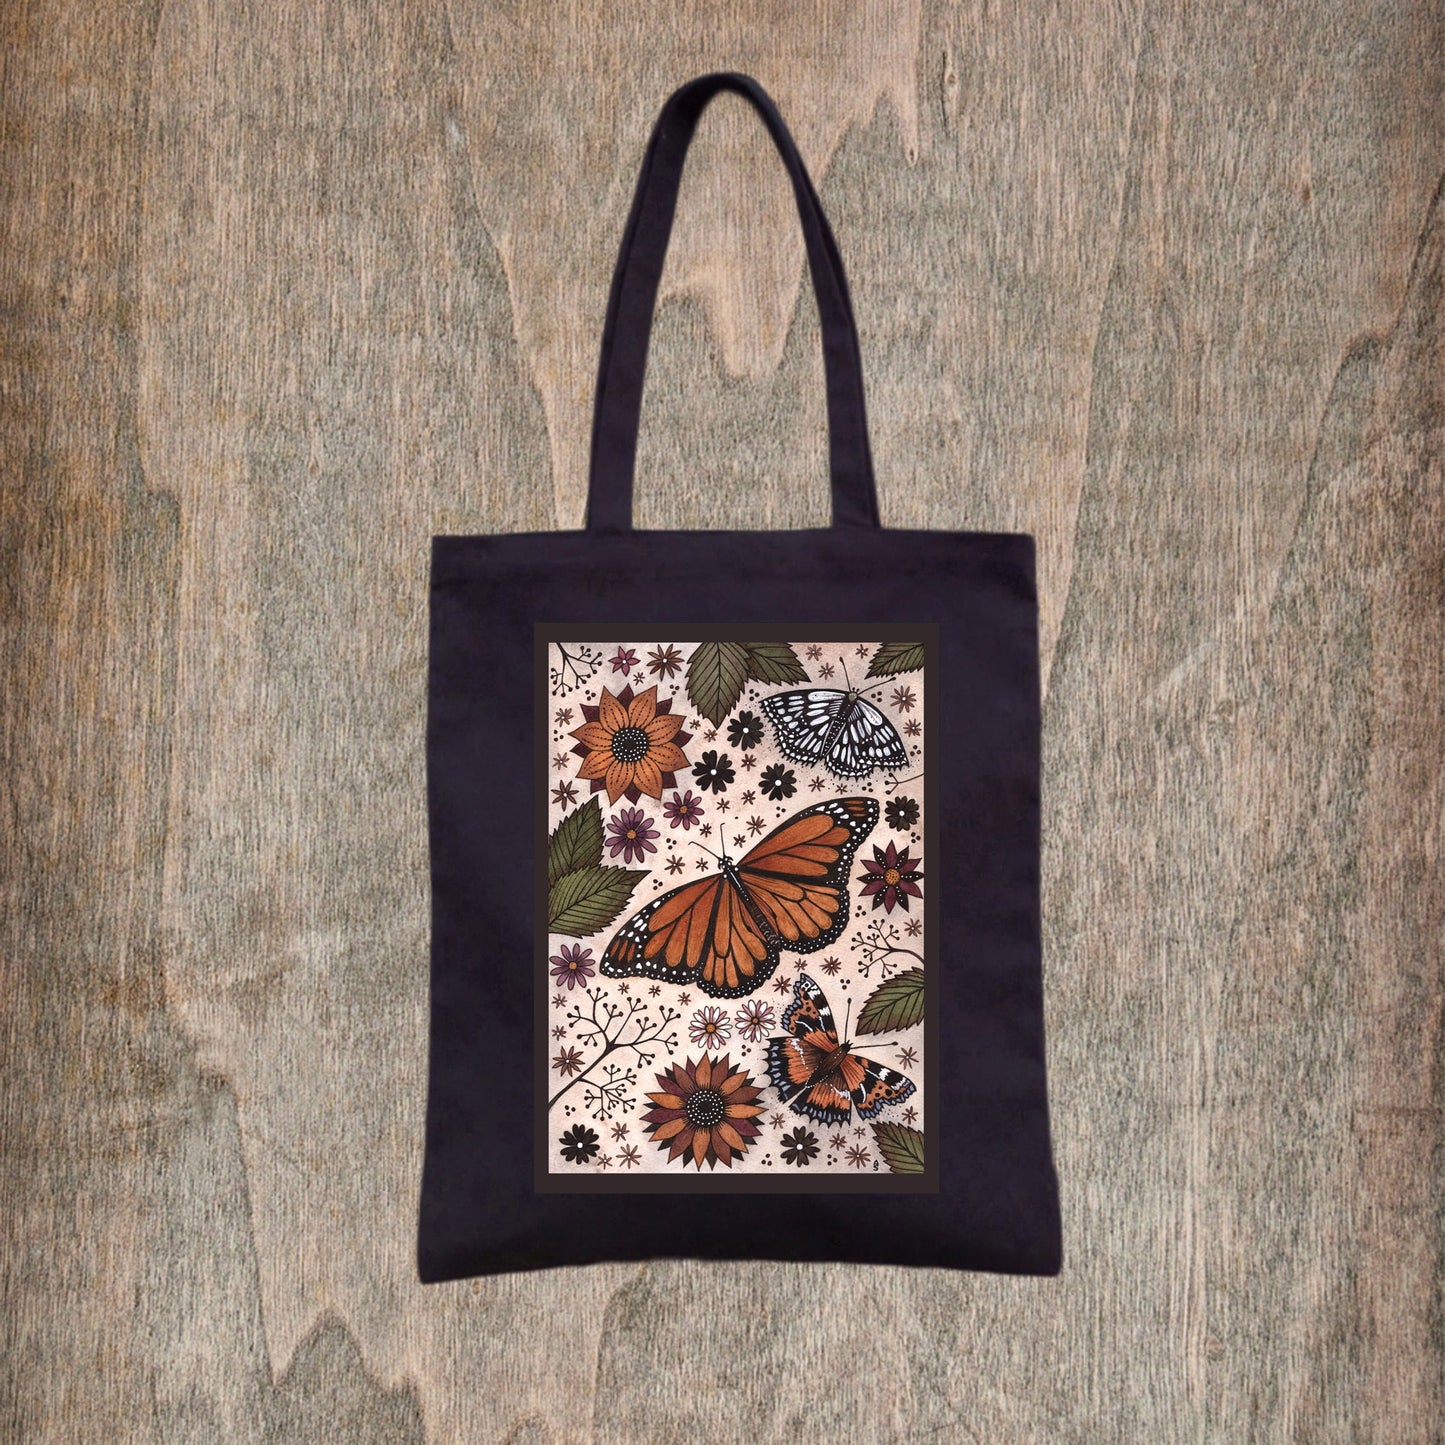 Tote Bag Special Offer - Any 3 Simons Nest Standard Size Cotton Canvas Tote Bags For £35 Pounds - Mix & Match Any Design